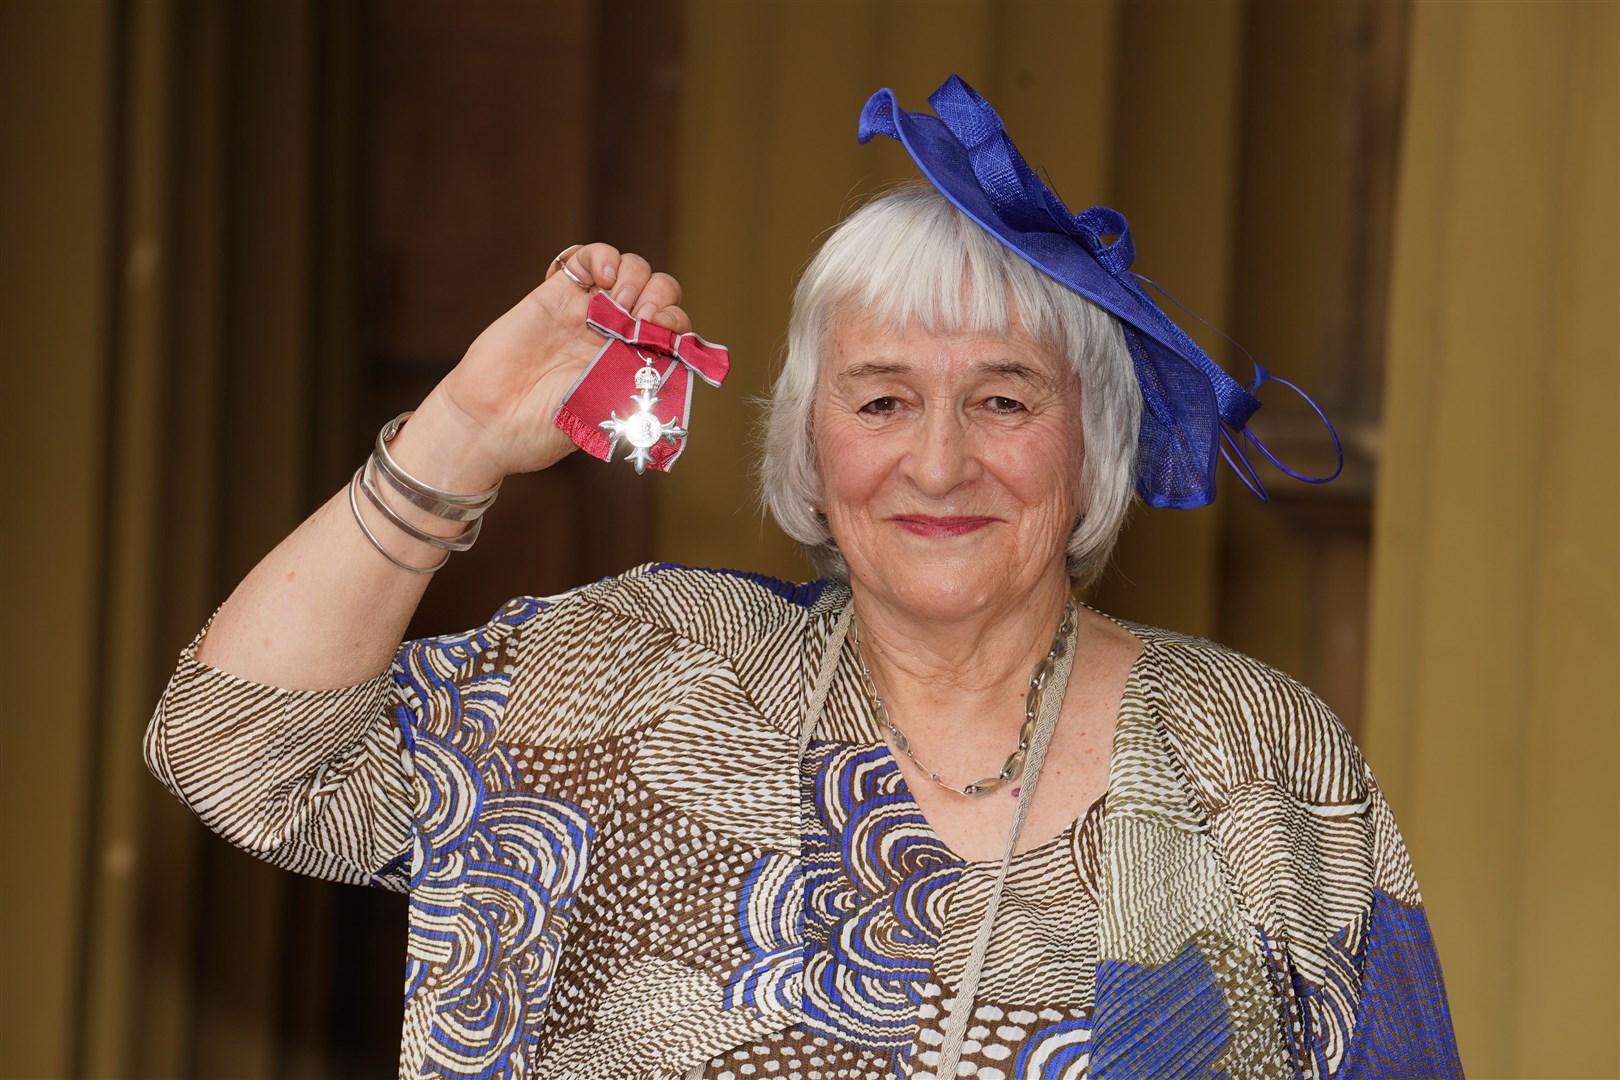 Helen Holtam was honoured after running origami classes for inmates at a Wiltshire prison (Jordan Pettitt/PA)